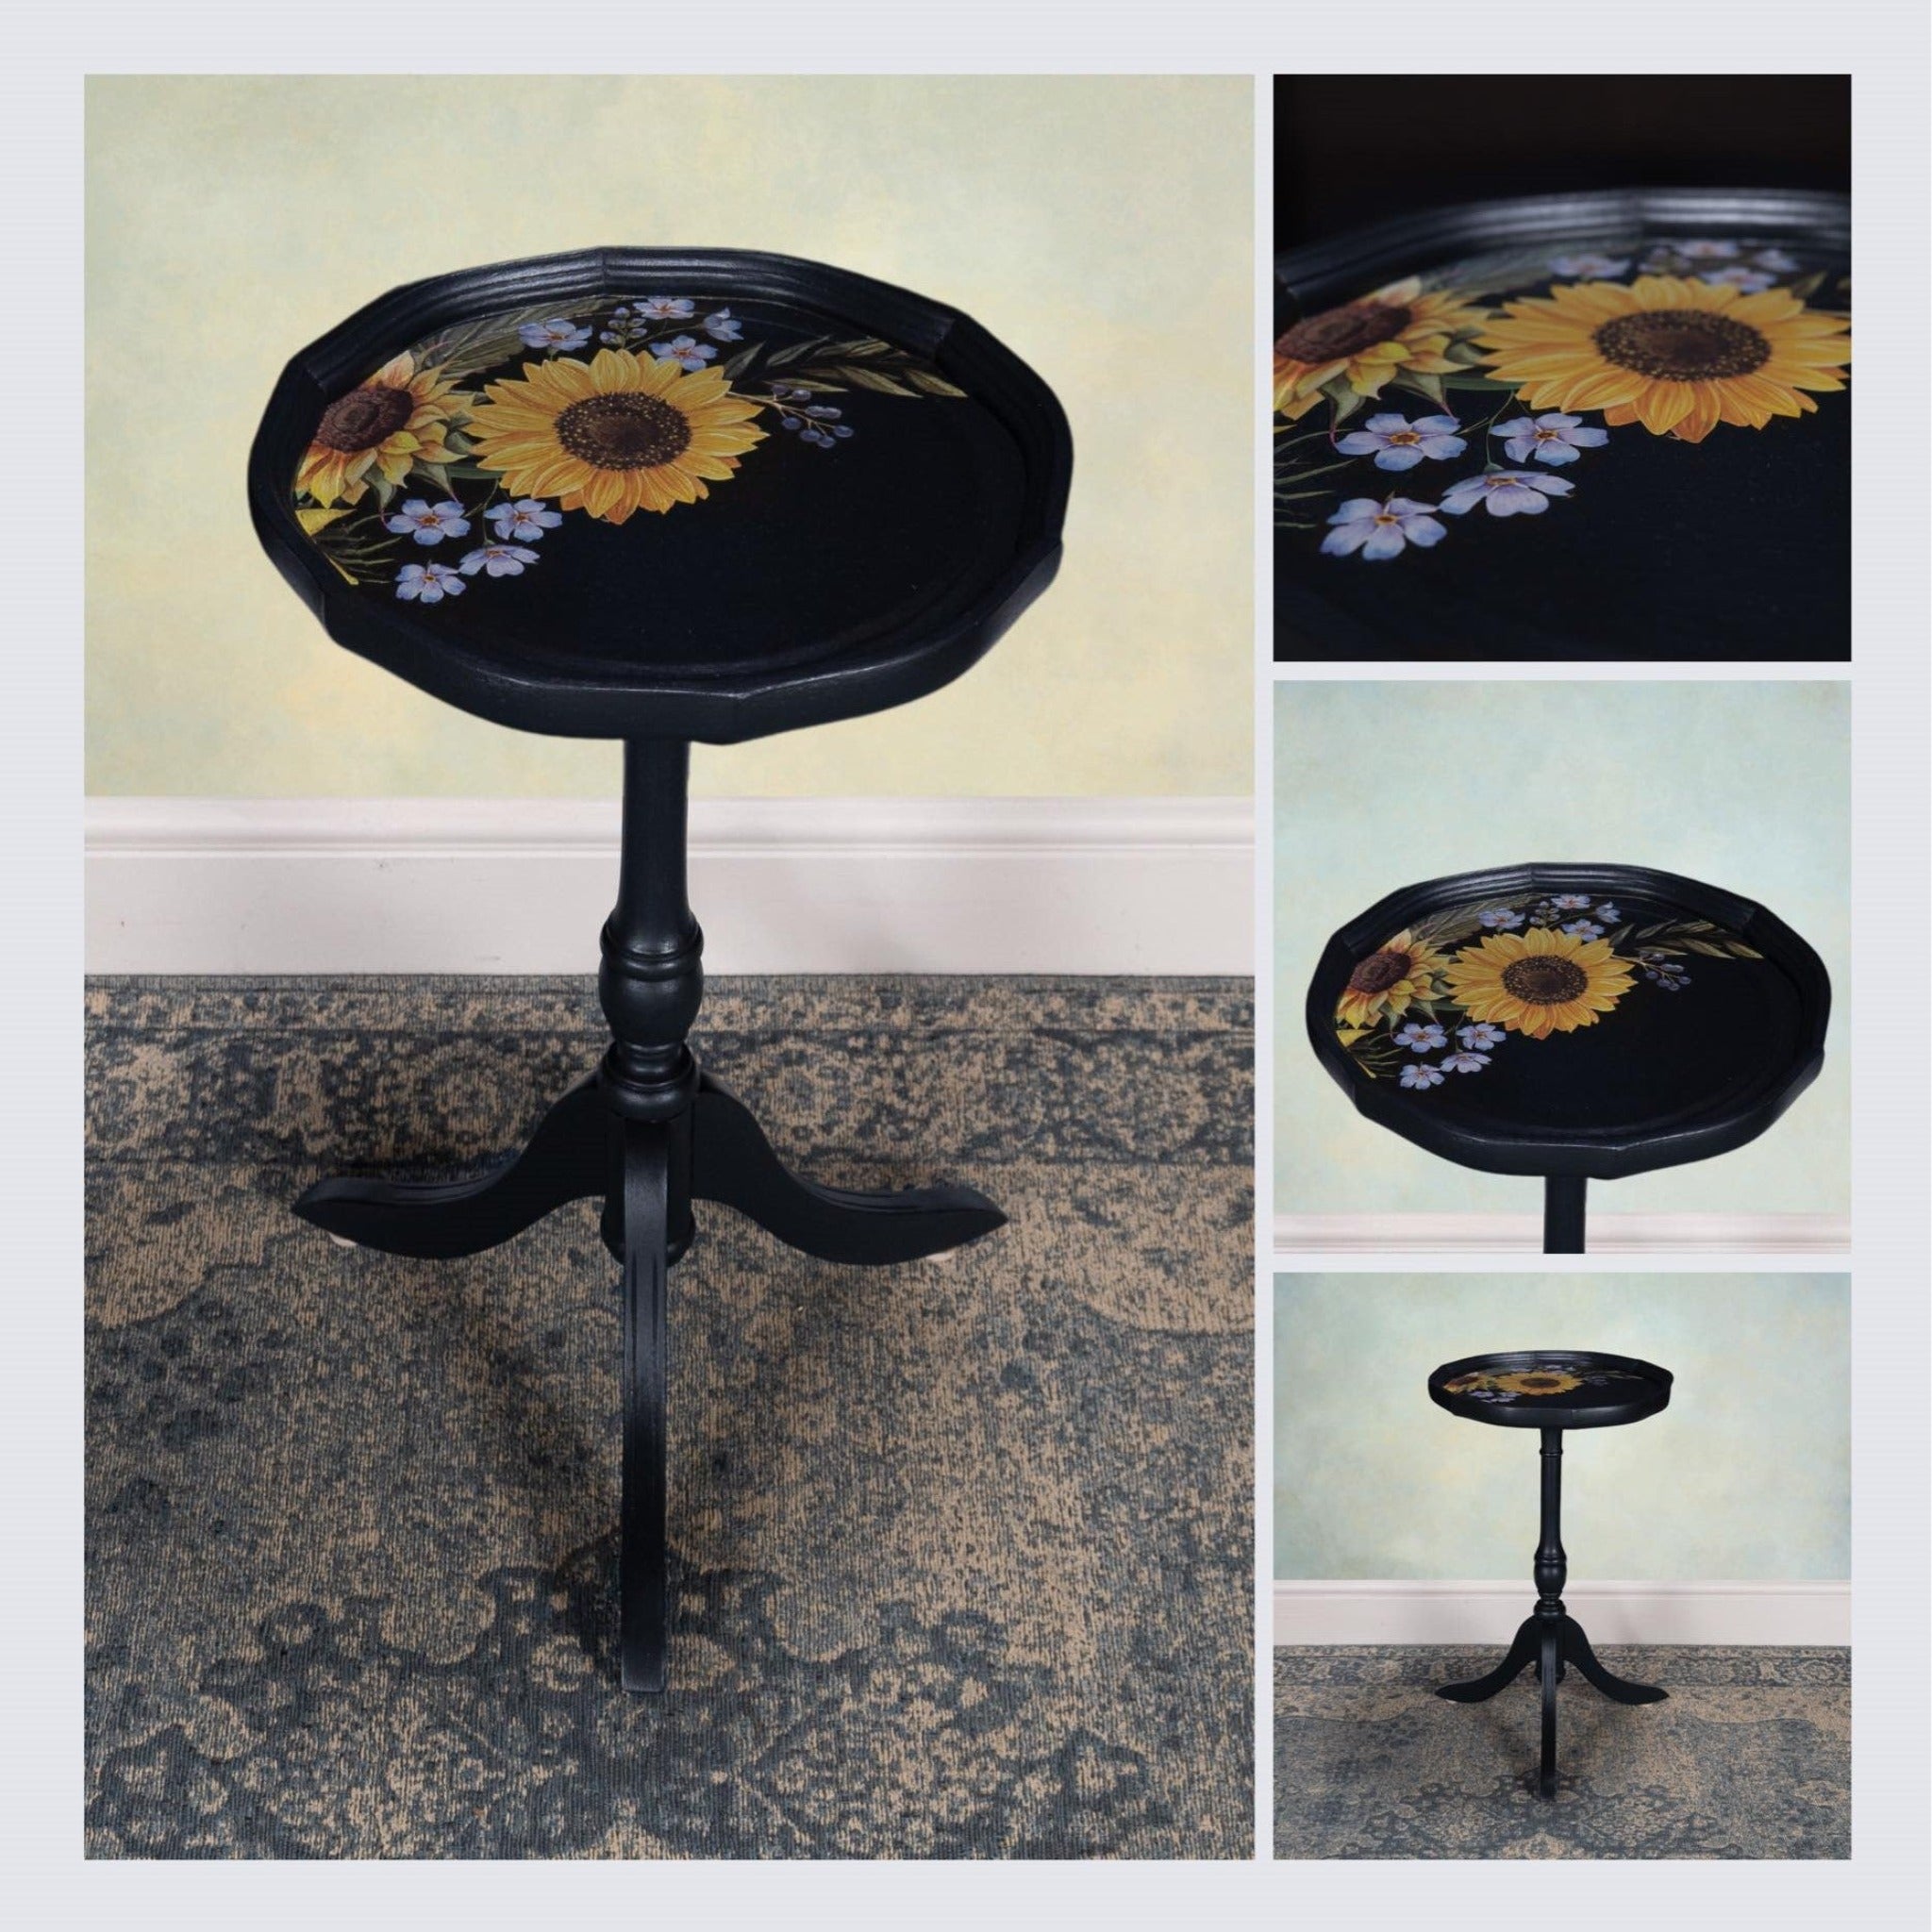 A vintage plant stand refurbished by Gracie's House is painted black and features ReDesign ewith Prima's Sunflower Fields transfer on the top of the stand.